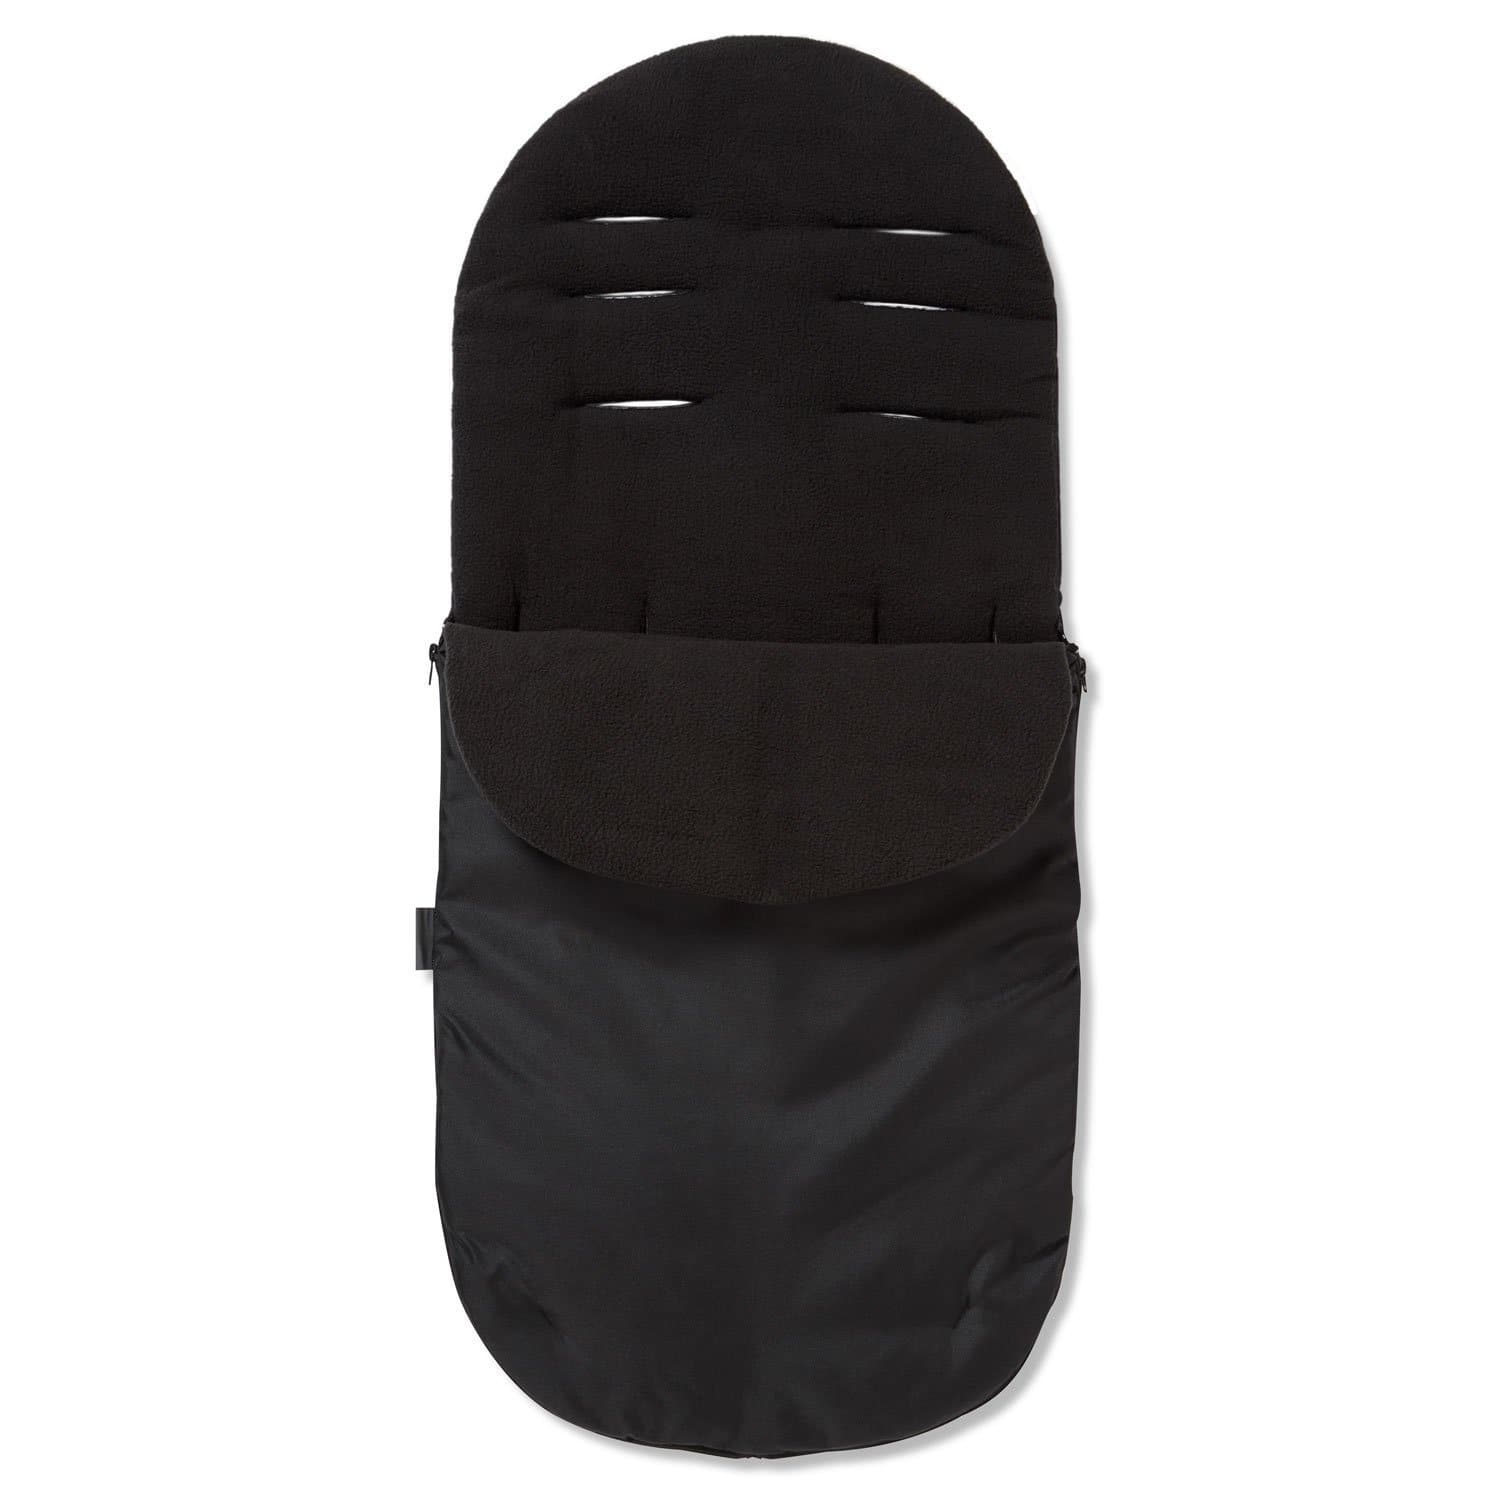 Footmuff / Cosy Toes Compatible with I'coo - Black / Fits All Models | For Your Little One